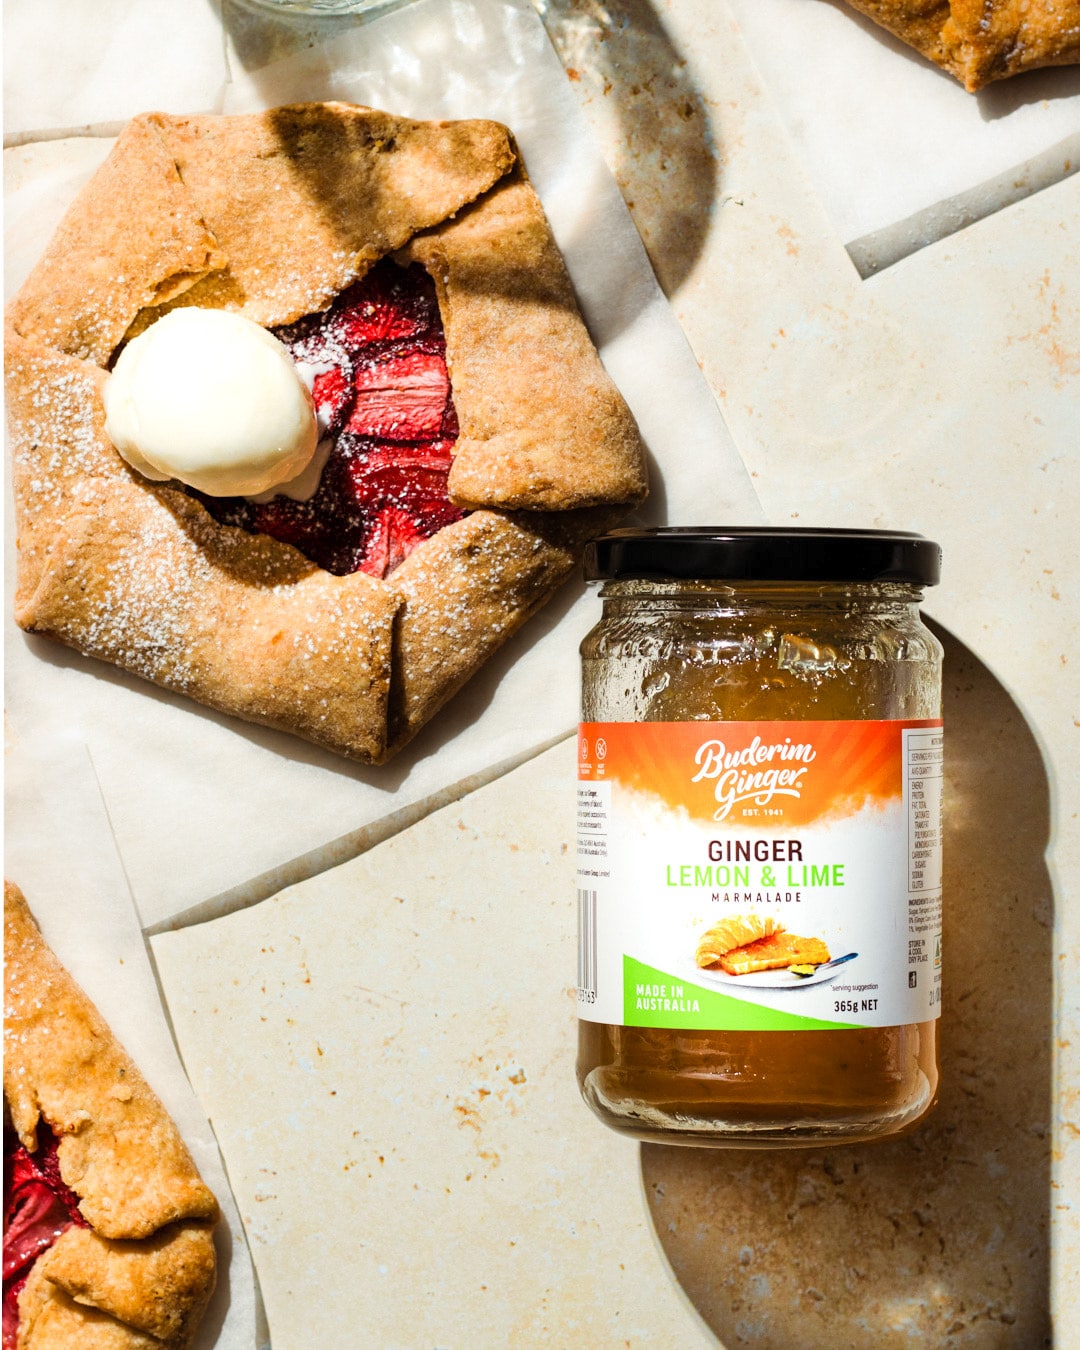 Recipe Strawberry Ginger Lemon And Lime Marmalade Galette